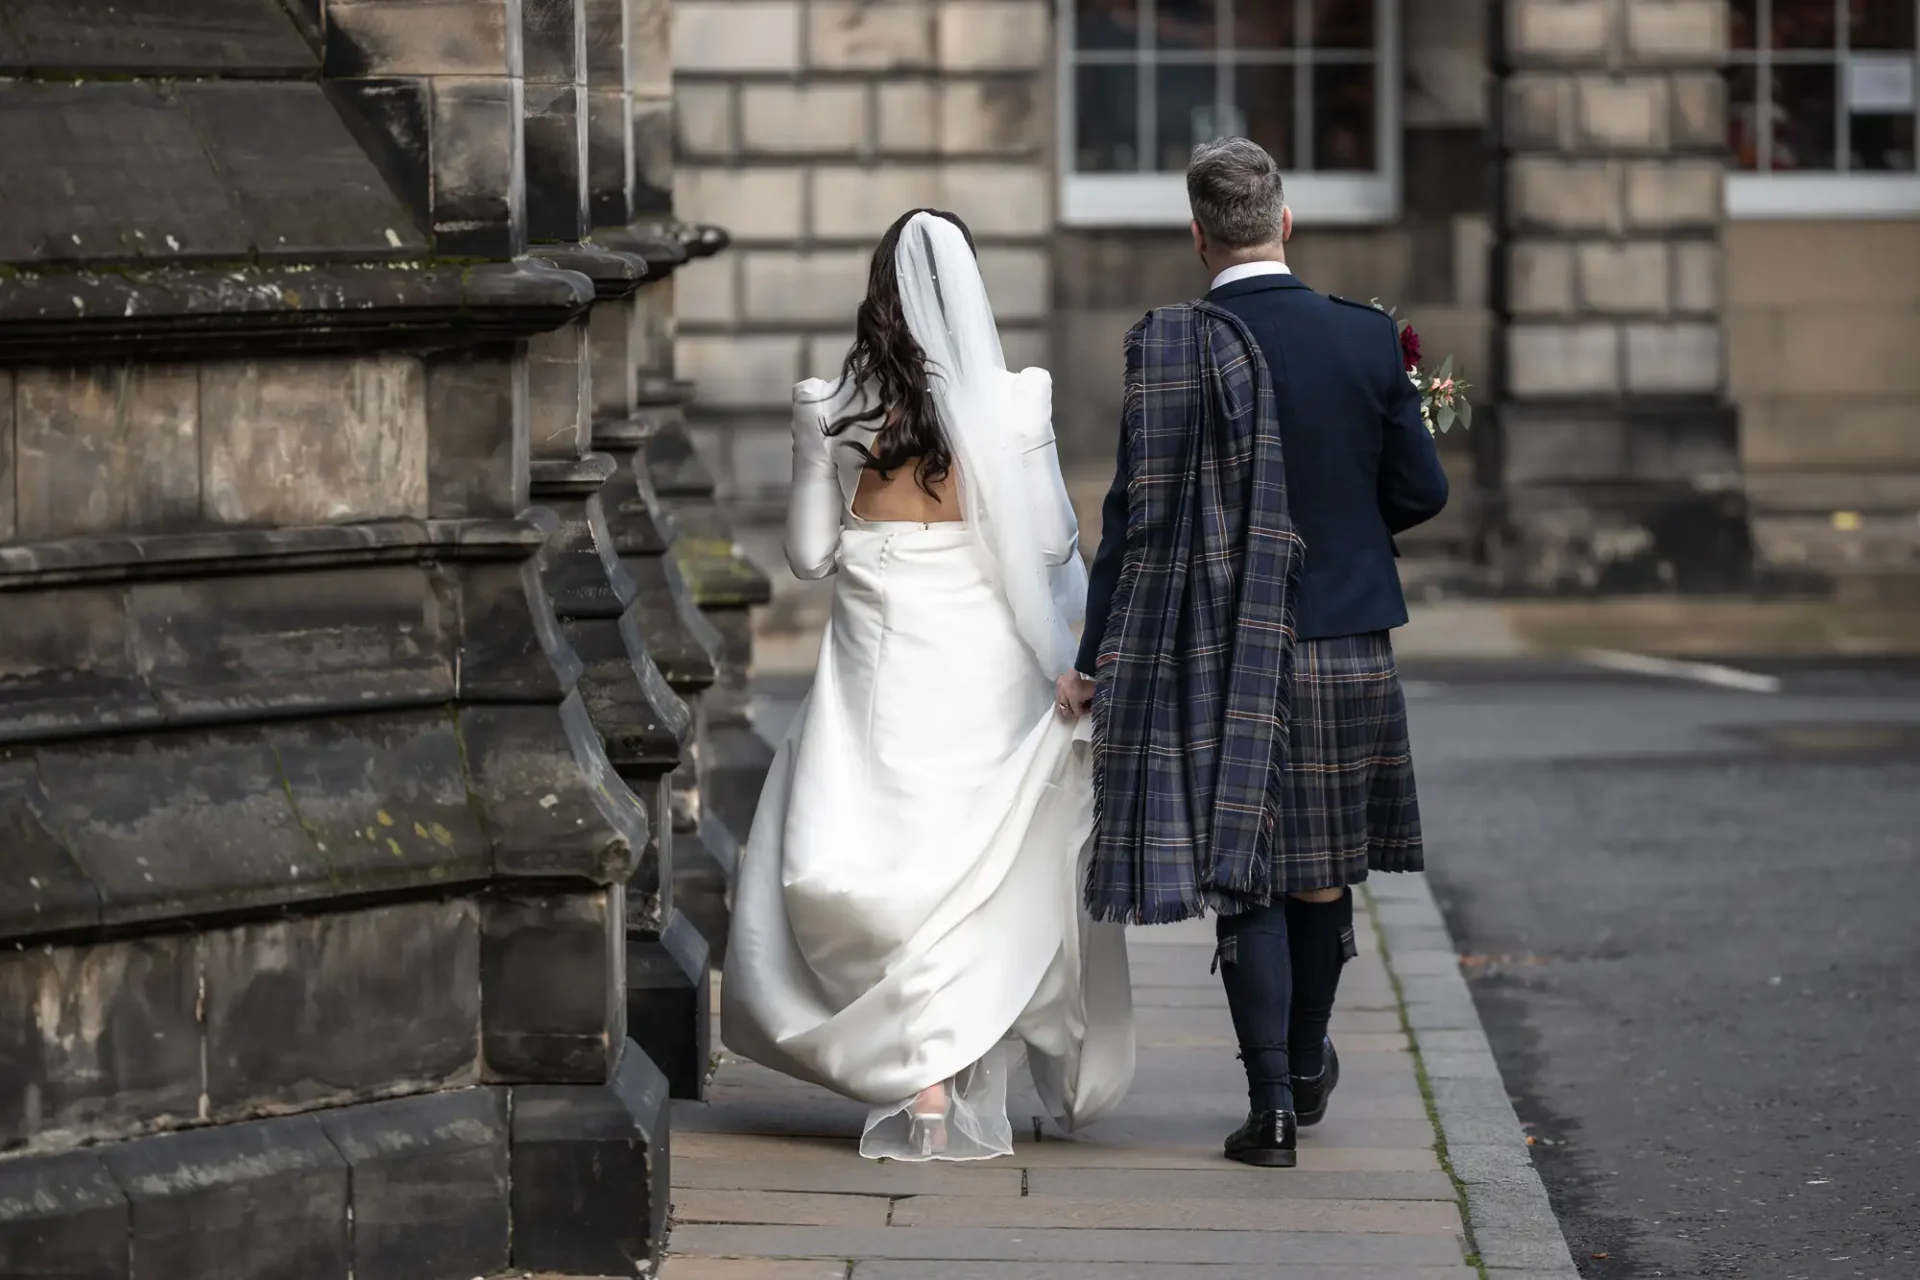 A bride in a white gown and a groom in a kilt walk together along a city street, viewed from behind.